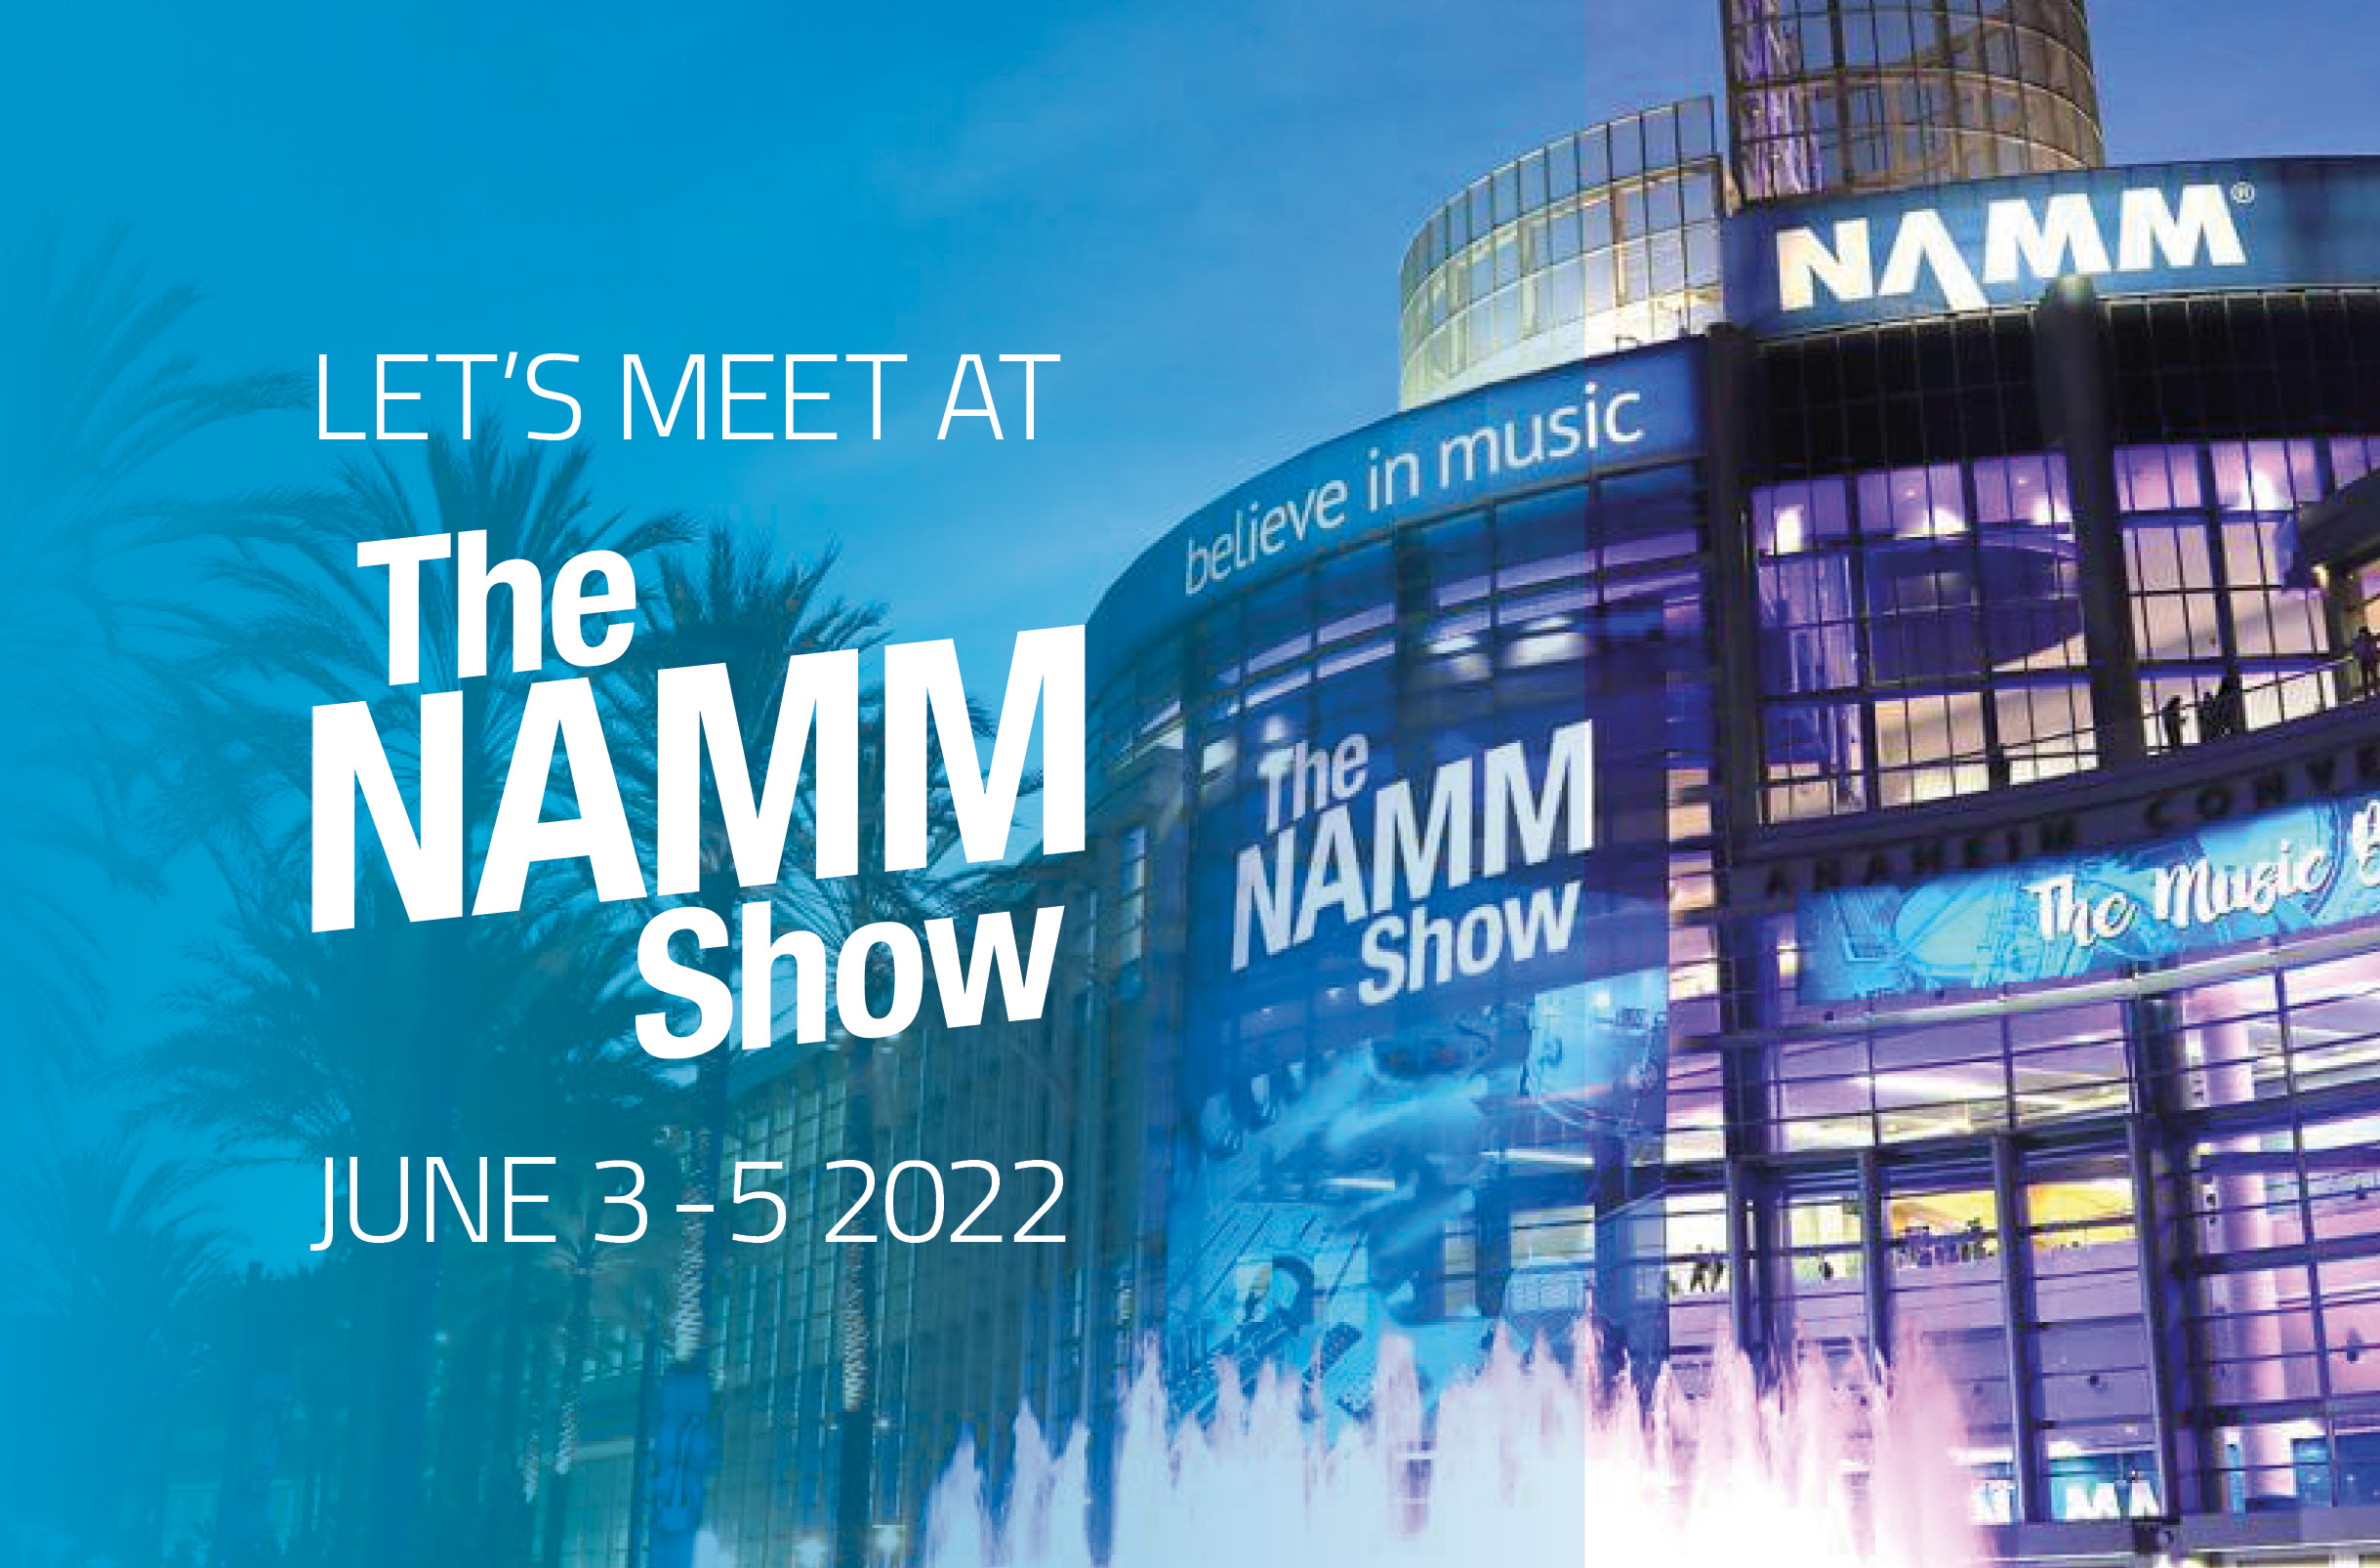 Let’s meet at the NAMM Show 2022: June 3-5 2022